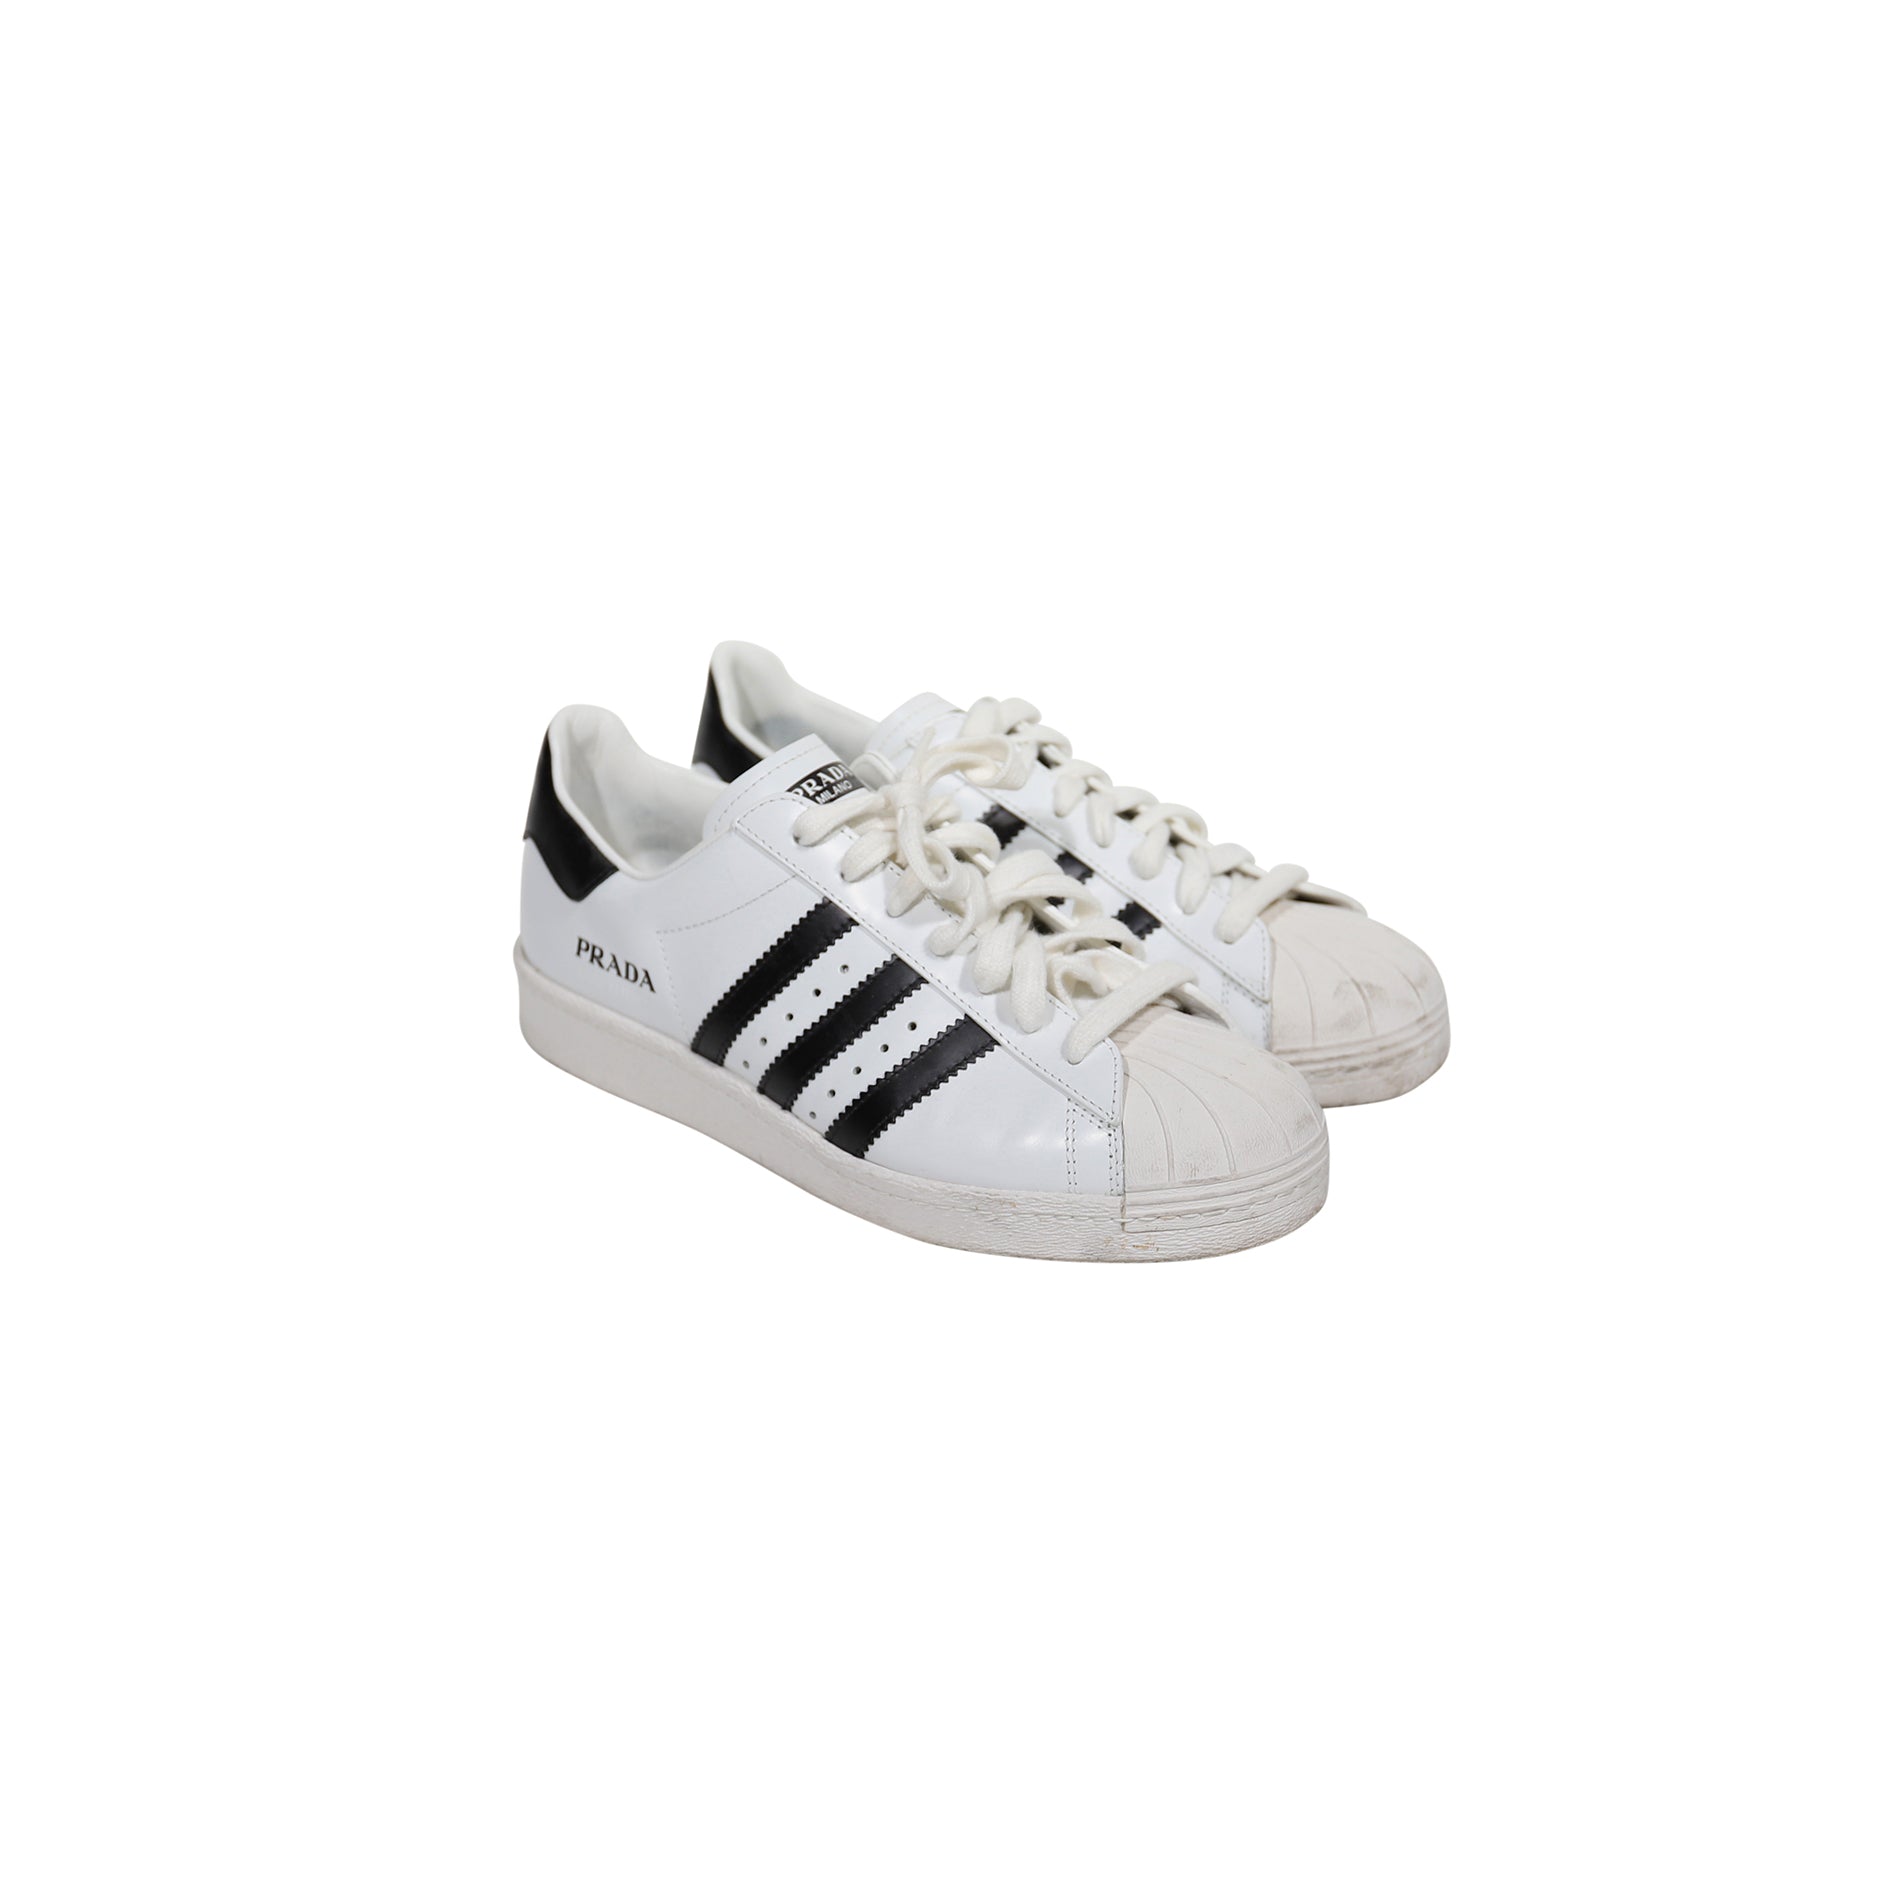 Addidas Black & White Adidas Superstar Shoes, Size: 6 - 11 at Rs 2400/pair  in New Delhi